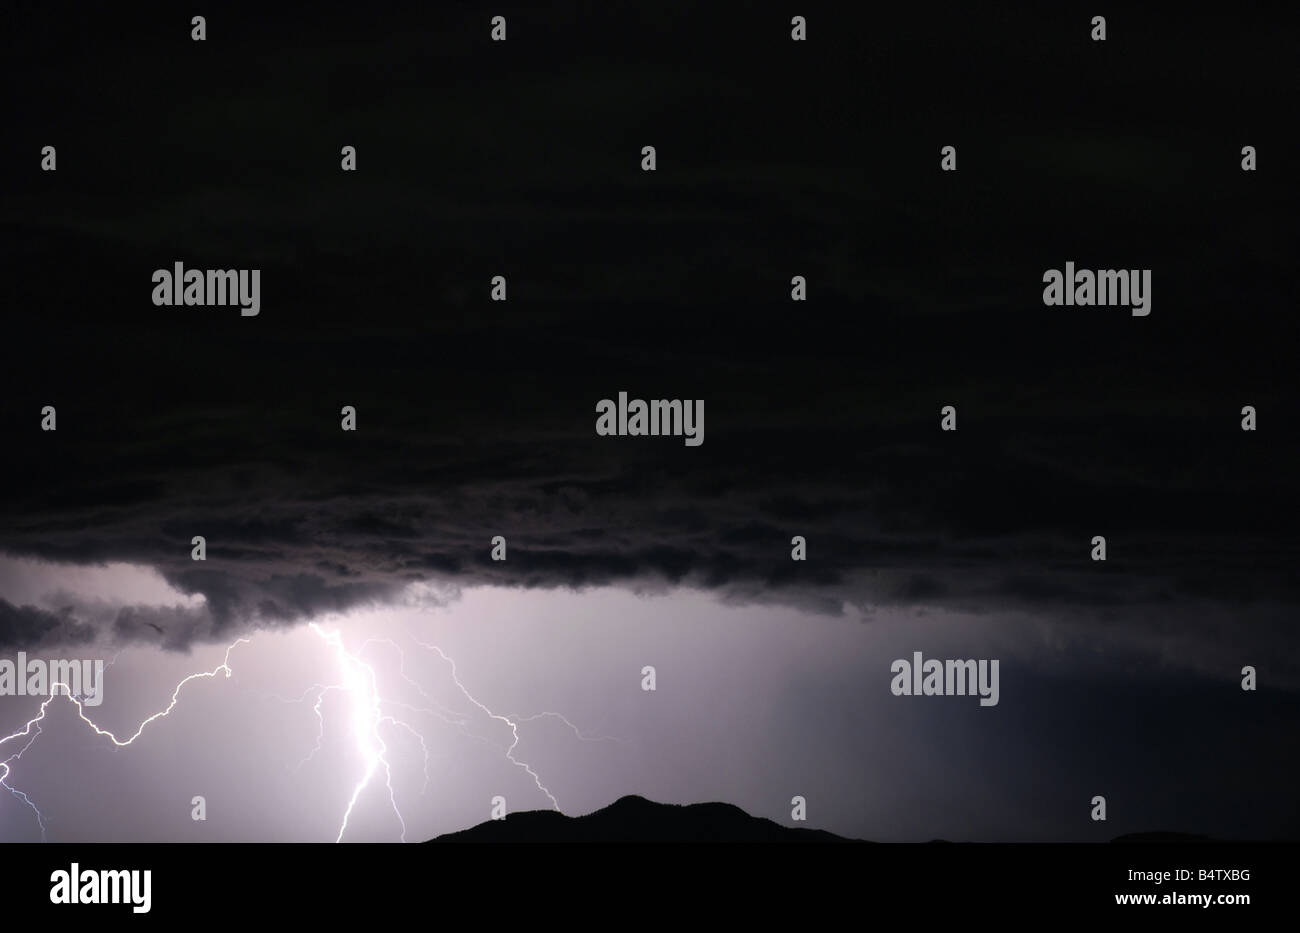 Five bolts of lightning on a stormy night over Raton, New Mexico Stock Photo